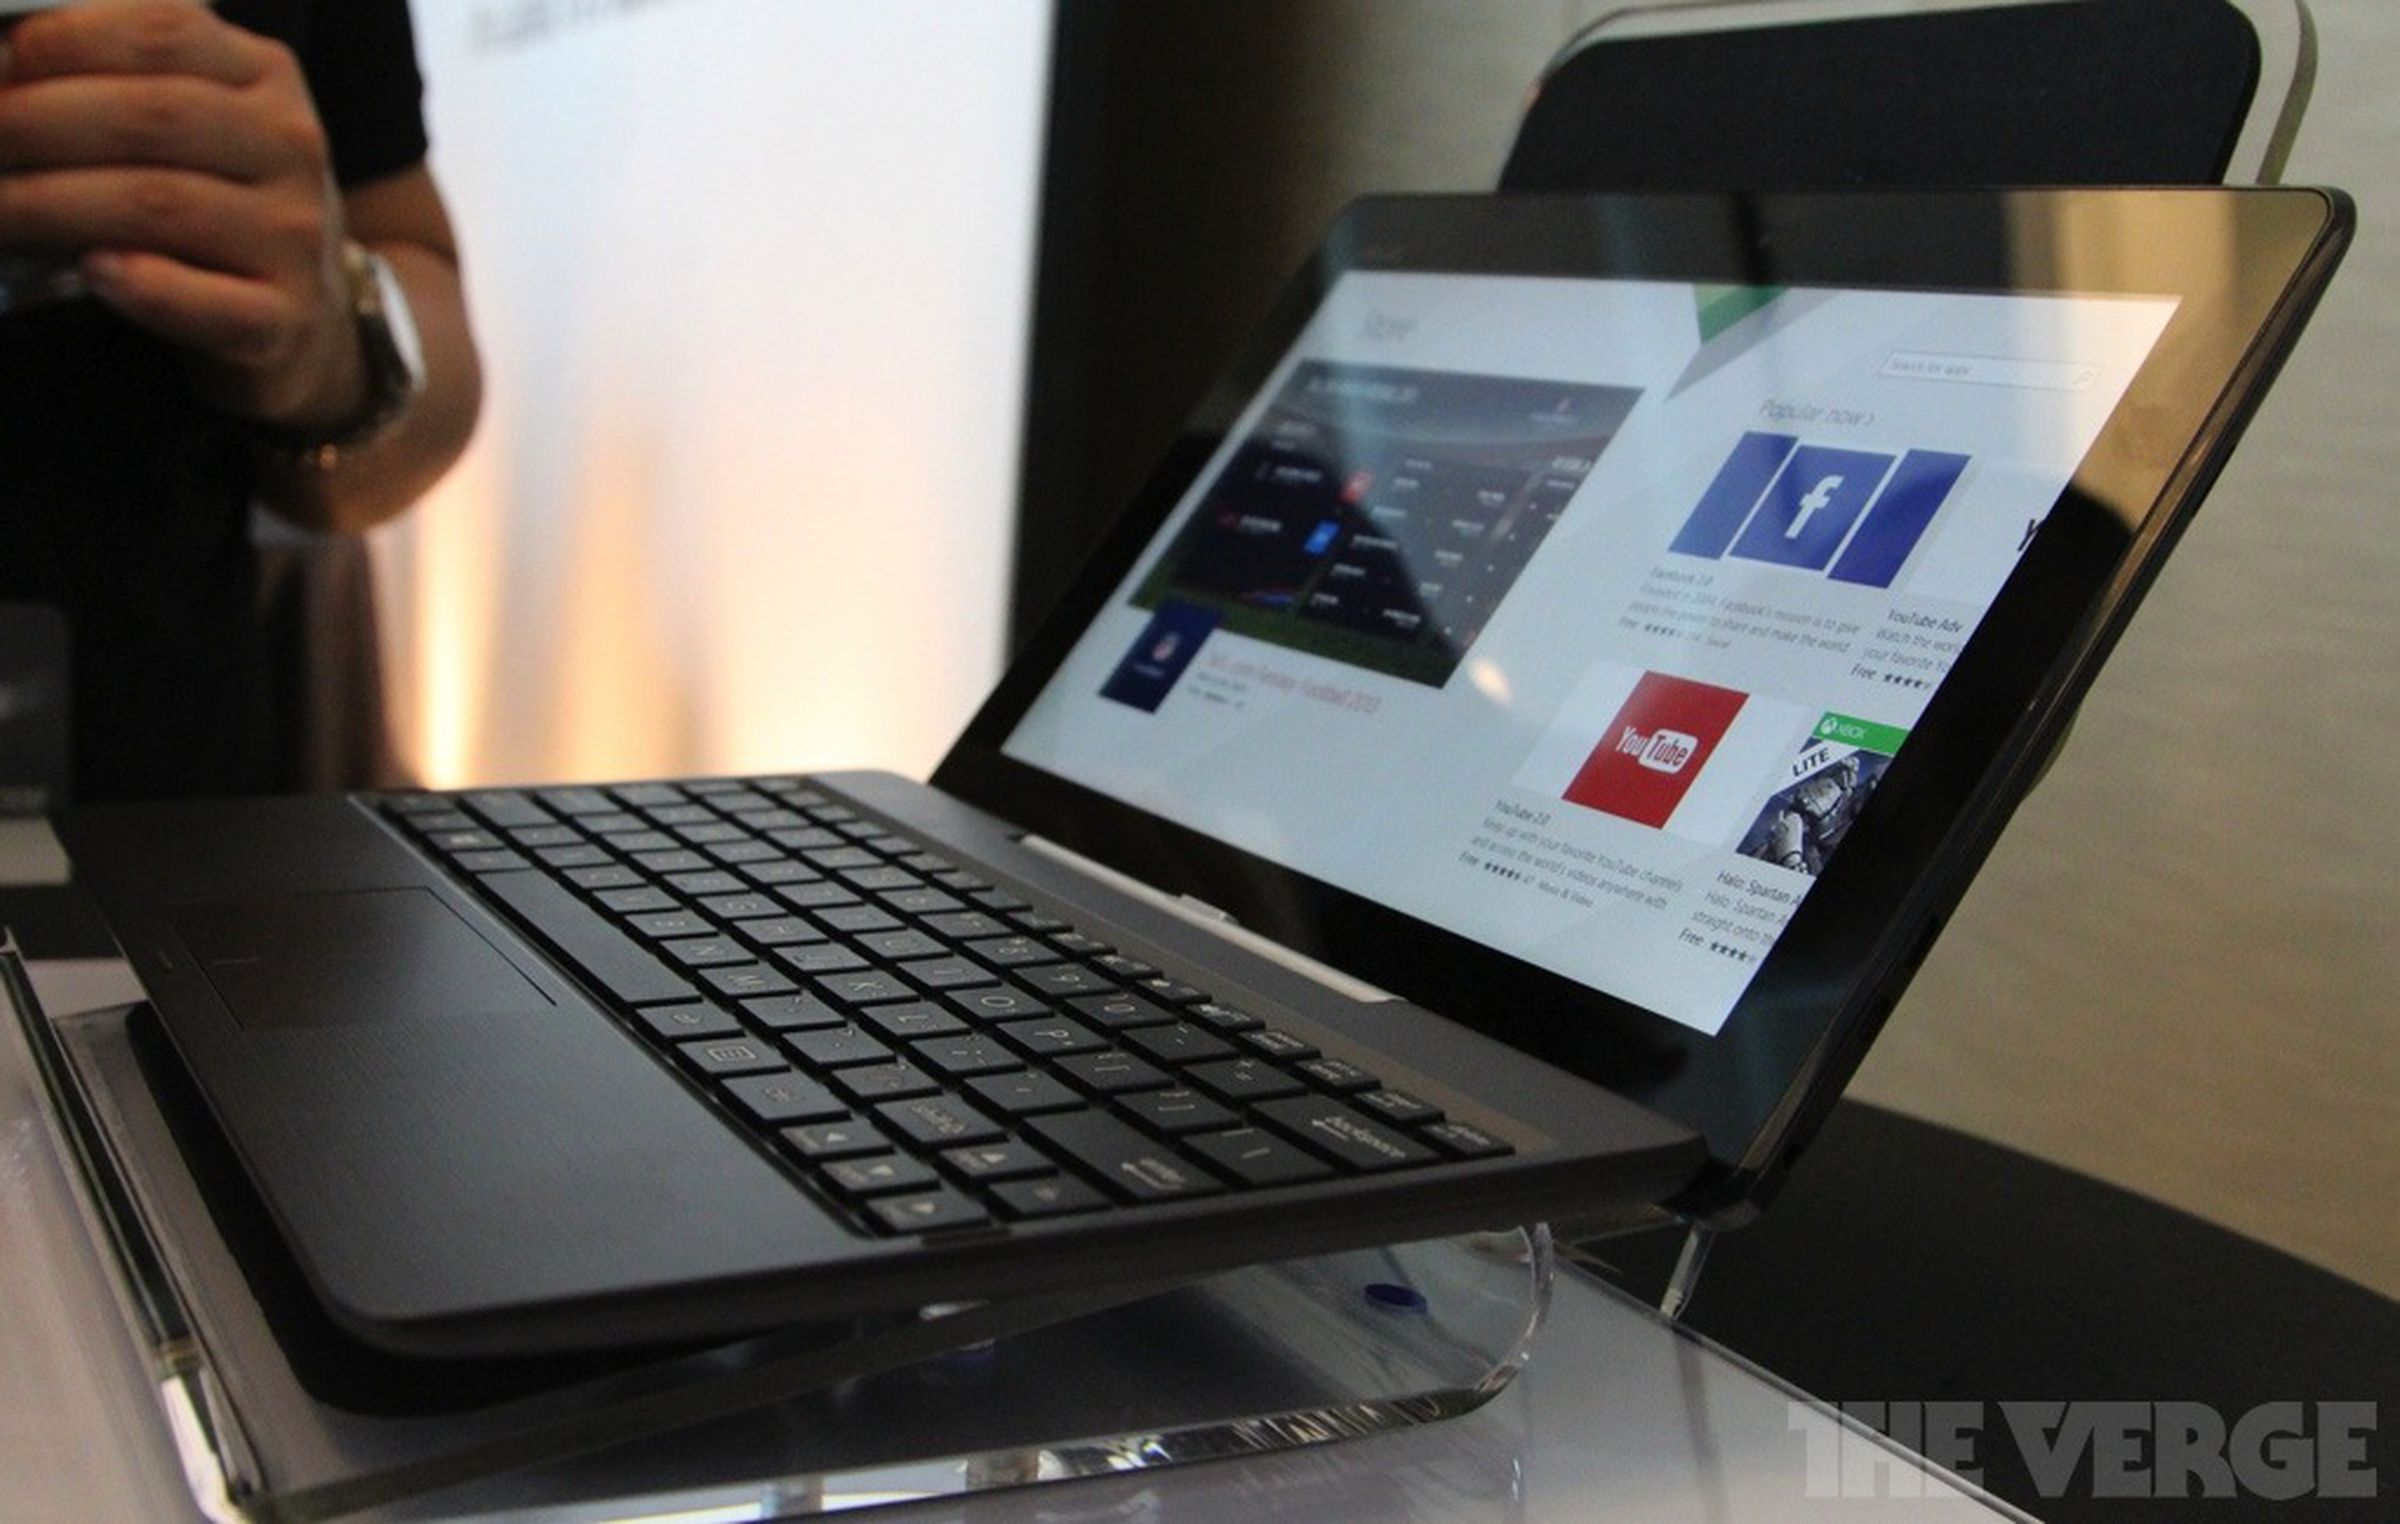 Asus Transformer Book T100 hands-on pictures